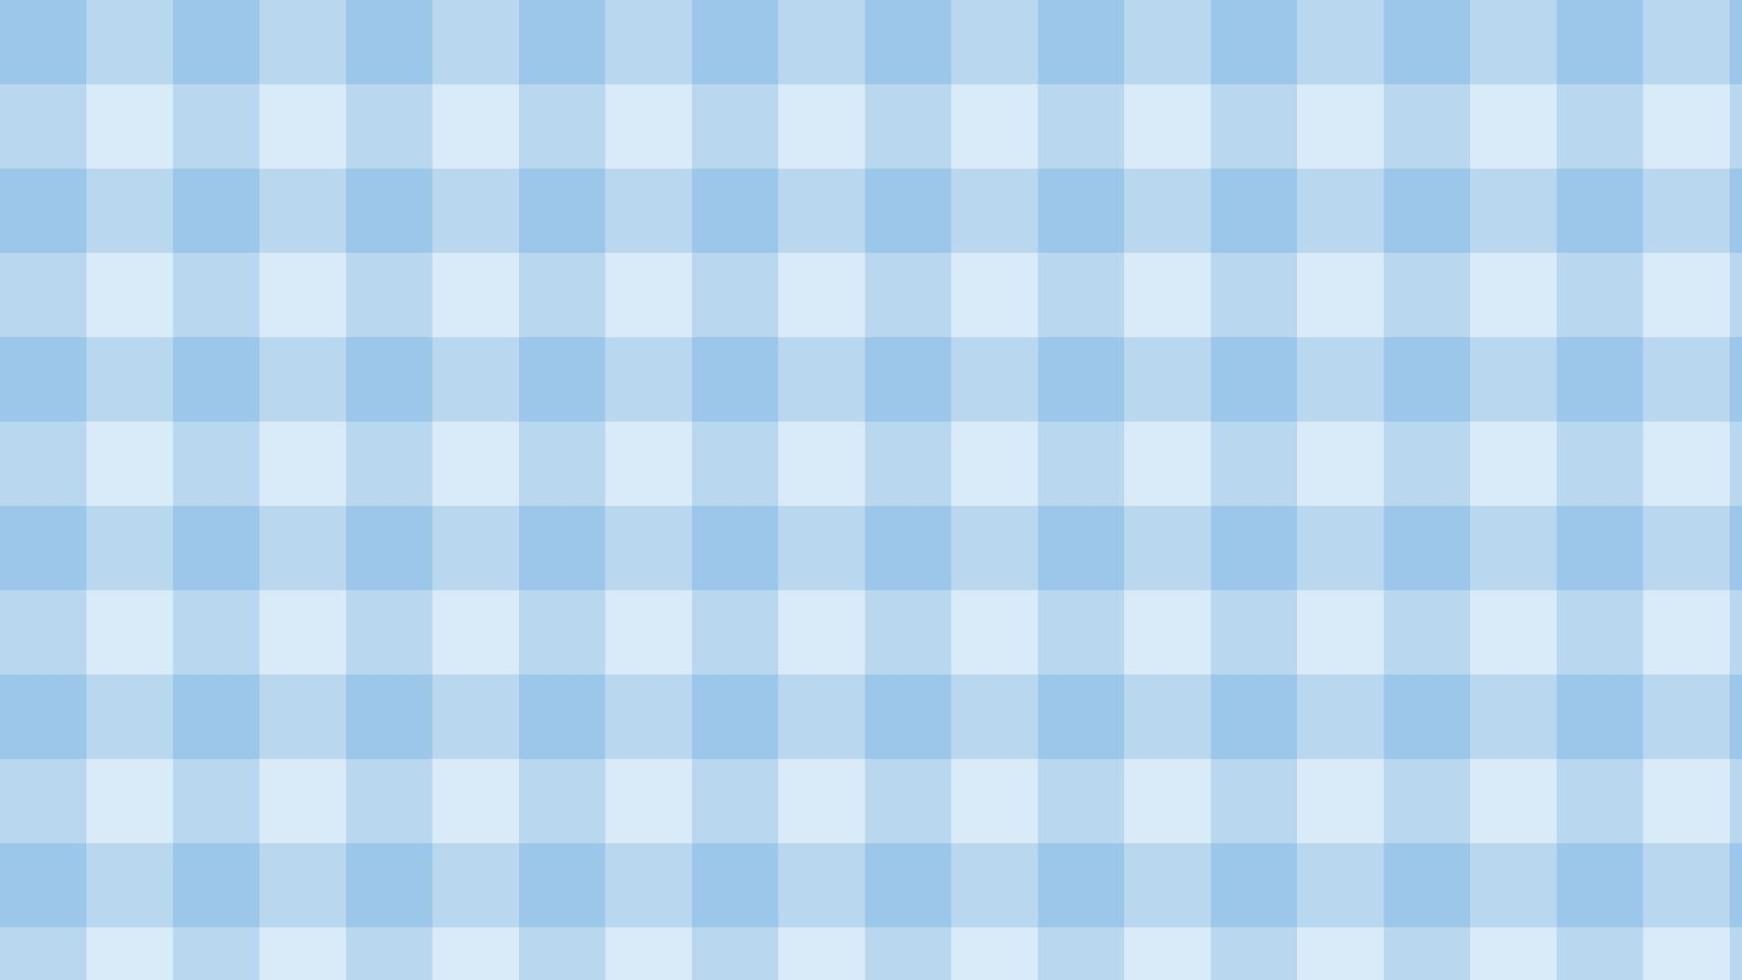 A blue and white checkered pattern that is seamless - Checkered